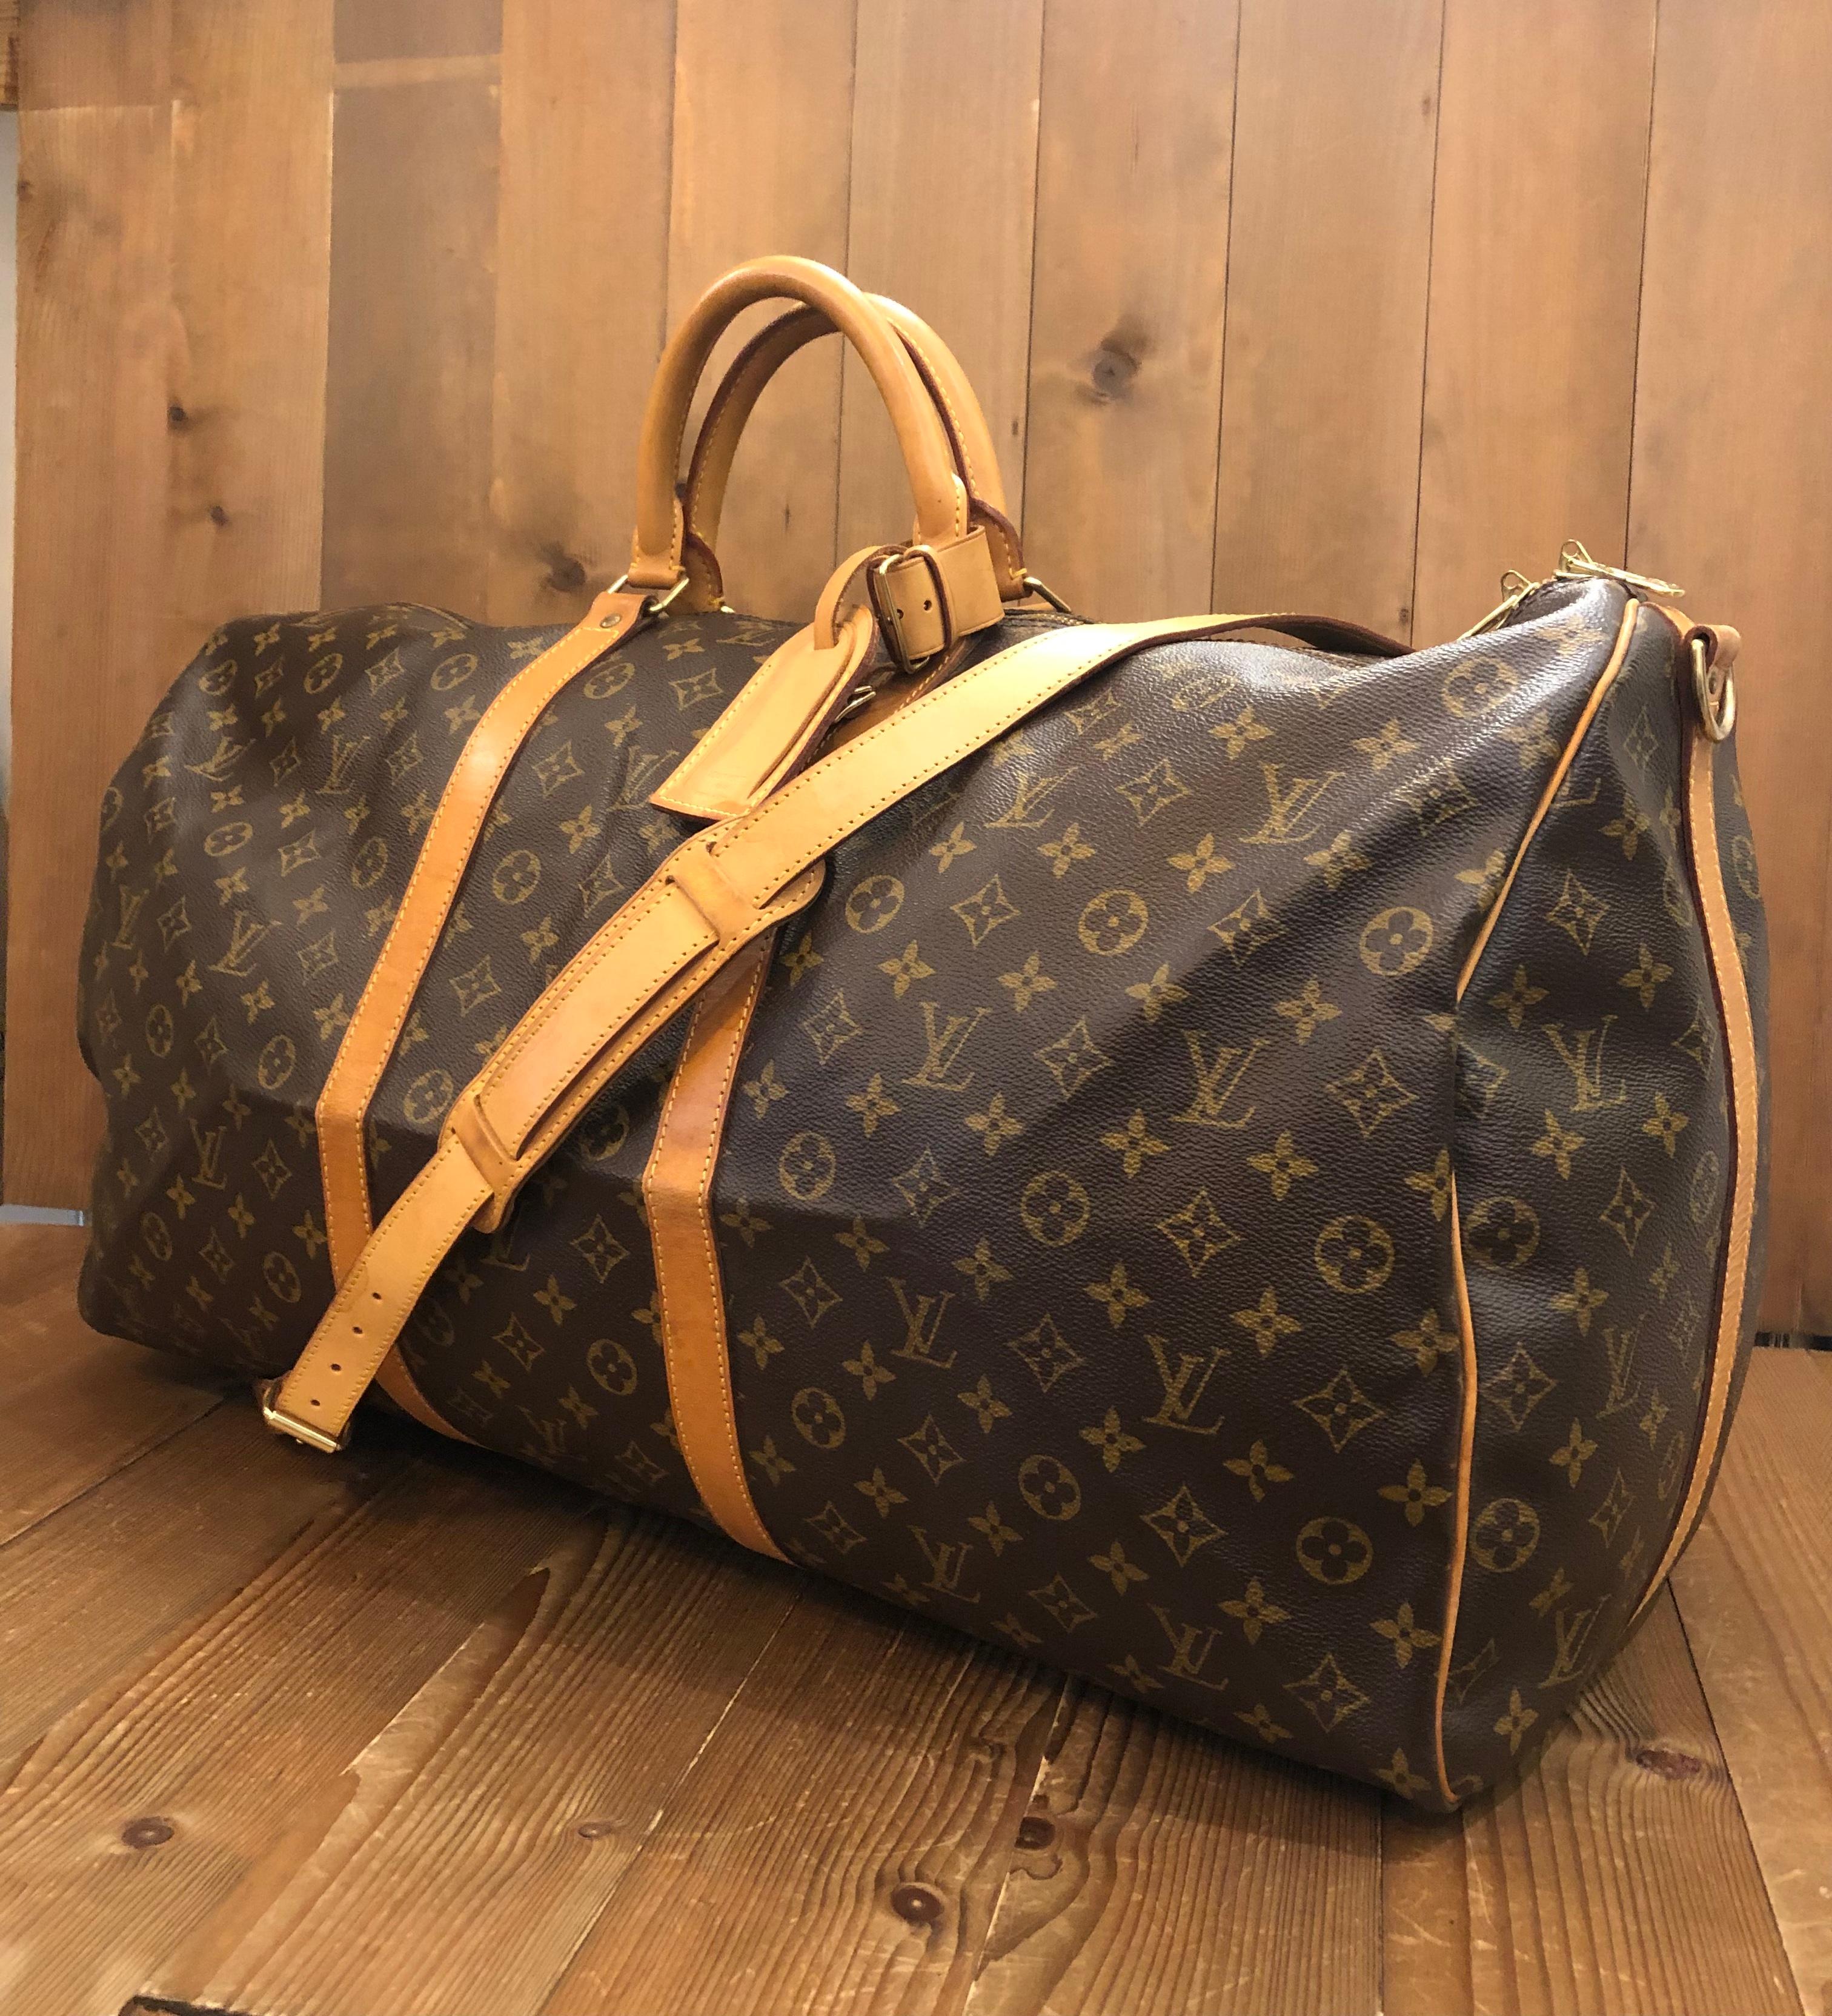 This vintage LOUIS VUITTON is crafted of LV monogram canvas in brown trimmed with cowhide leather. It’s the largest of the Keepall series. This Keepall comes with cowhide leather strap to carry it on the shoulder. Top double zipper opens to a